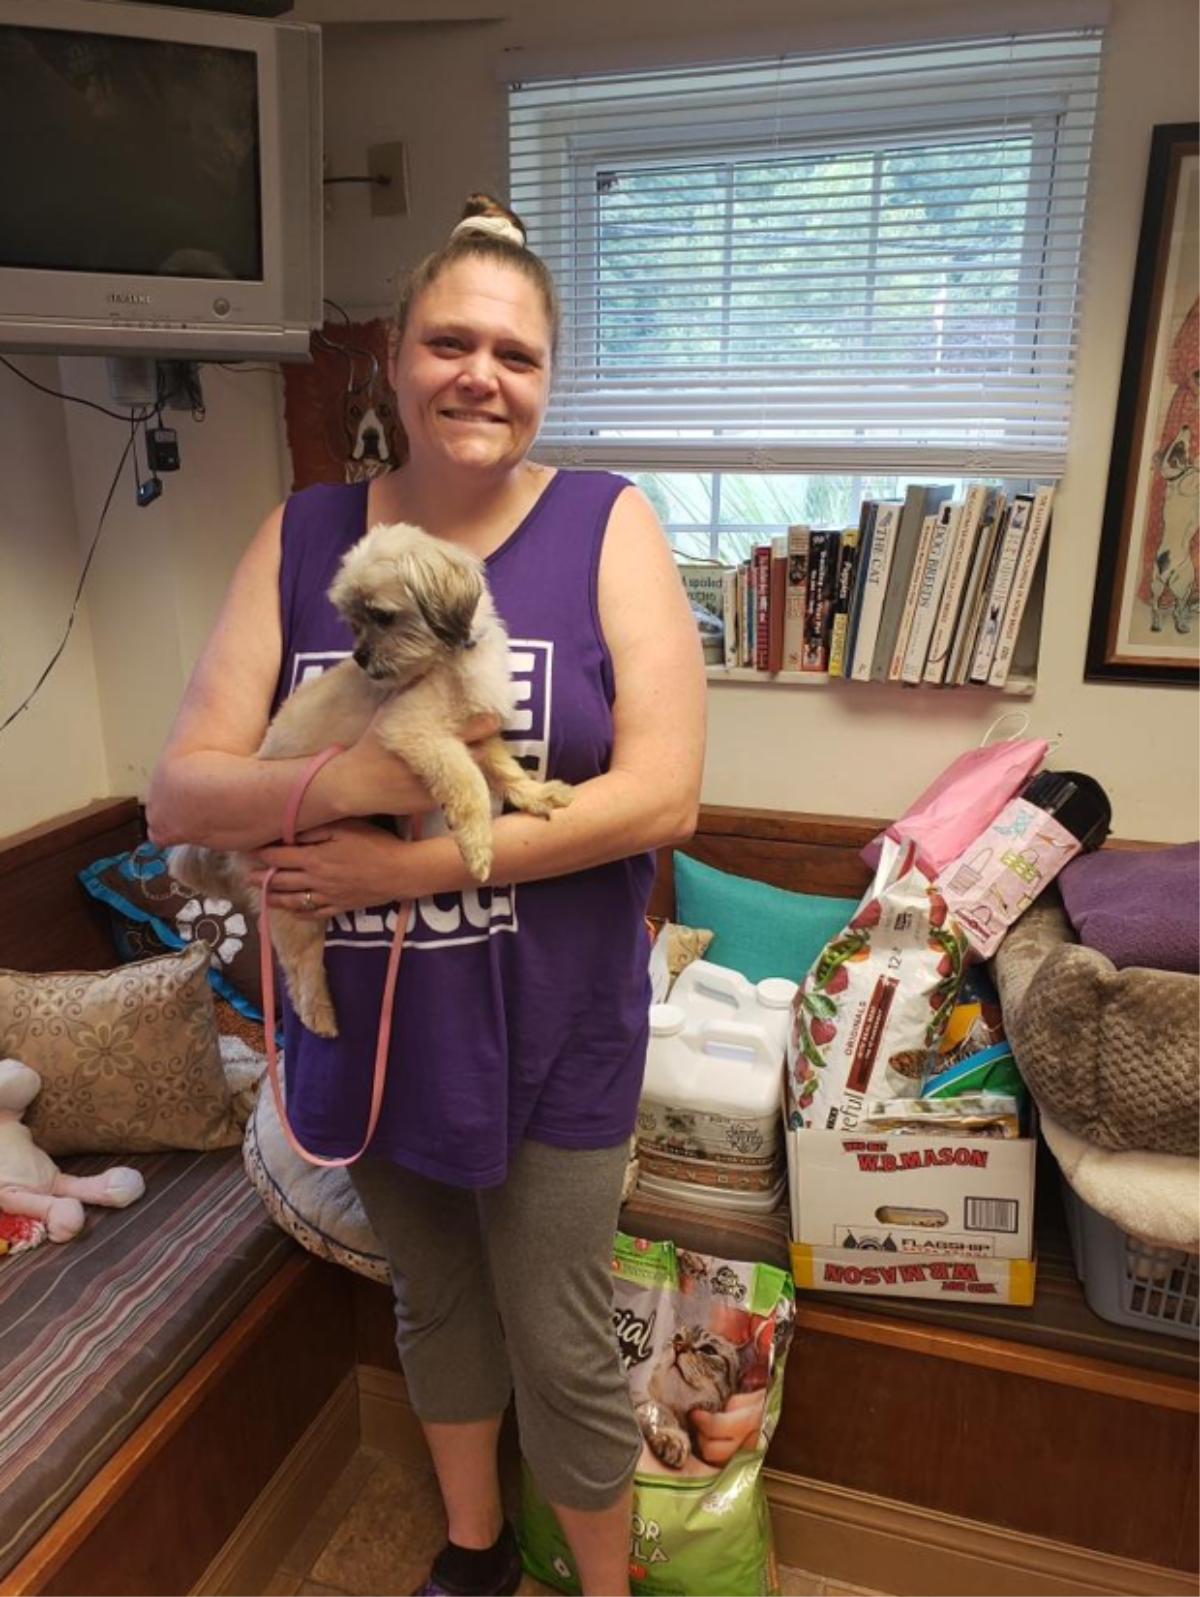 Donations to White Oak Safe Haven August 21, 2019 - Superior Home Care